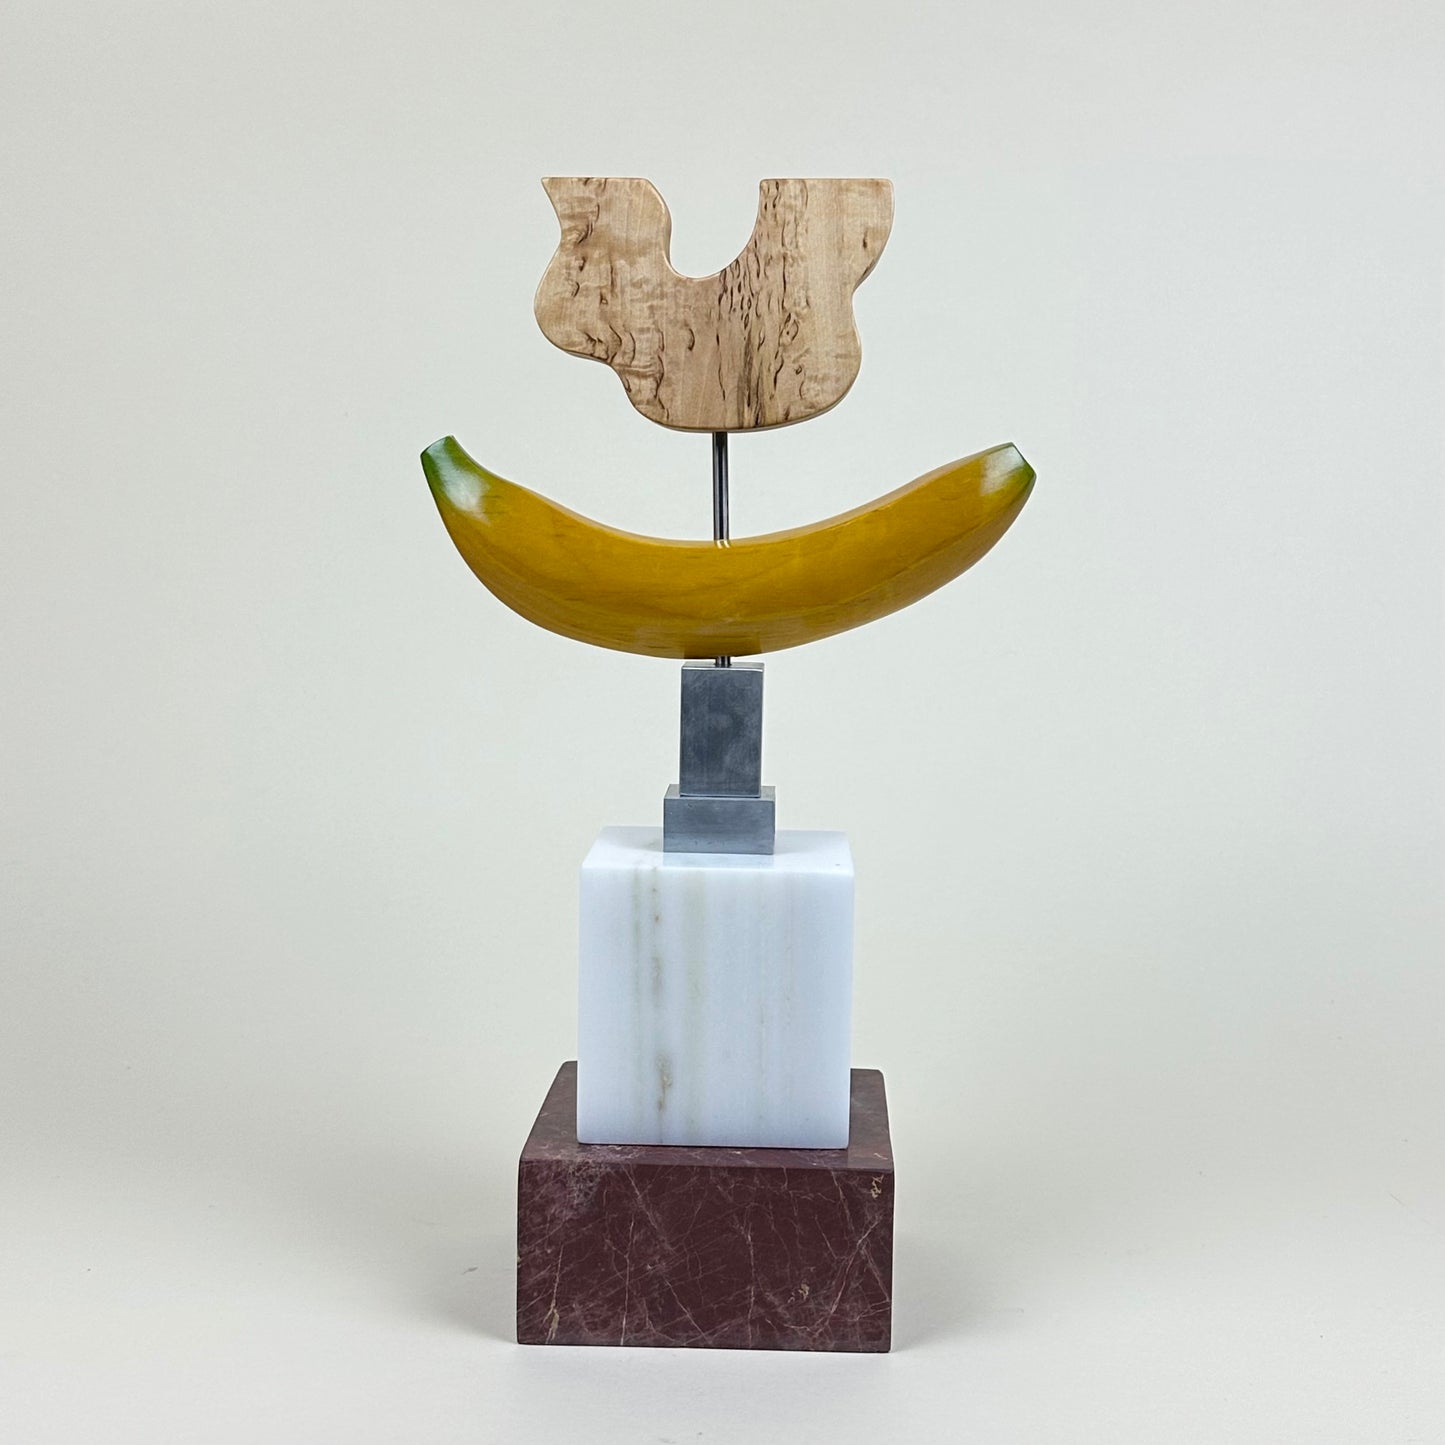 Bananas candle holder by Public Studio